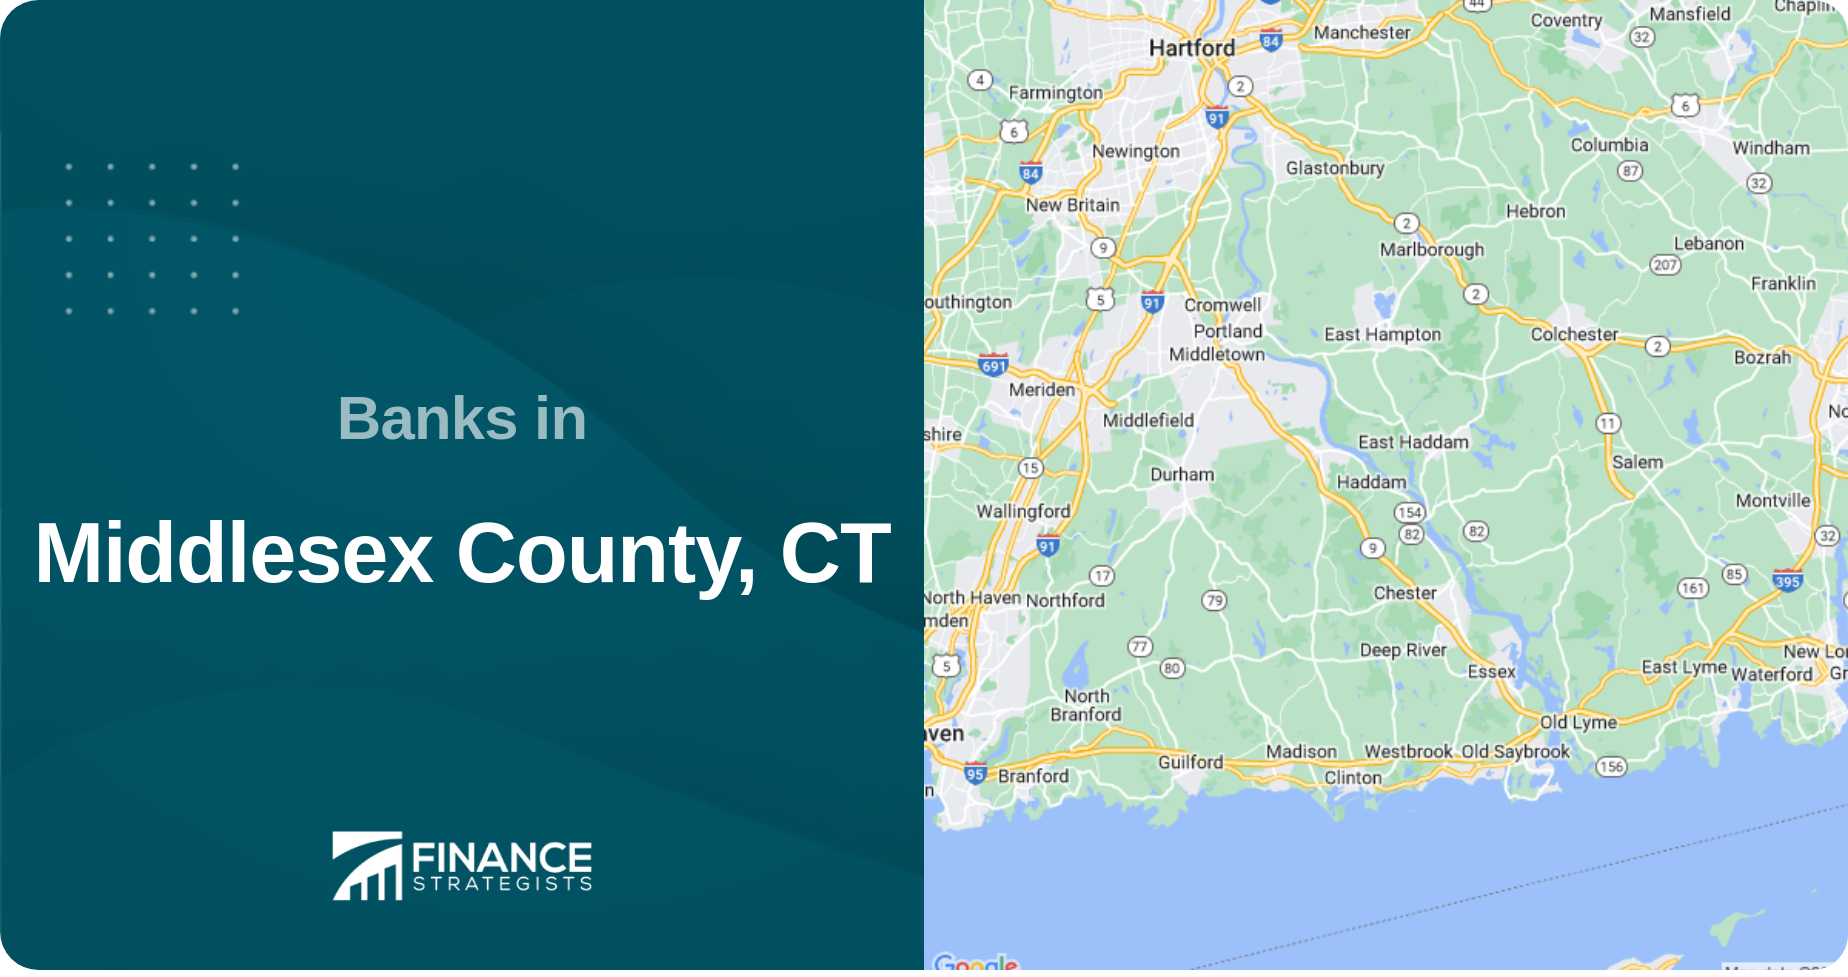 Banks in Middlesex County, CT